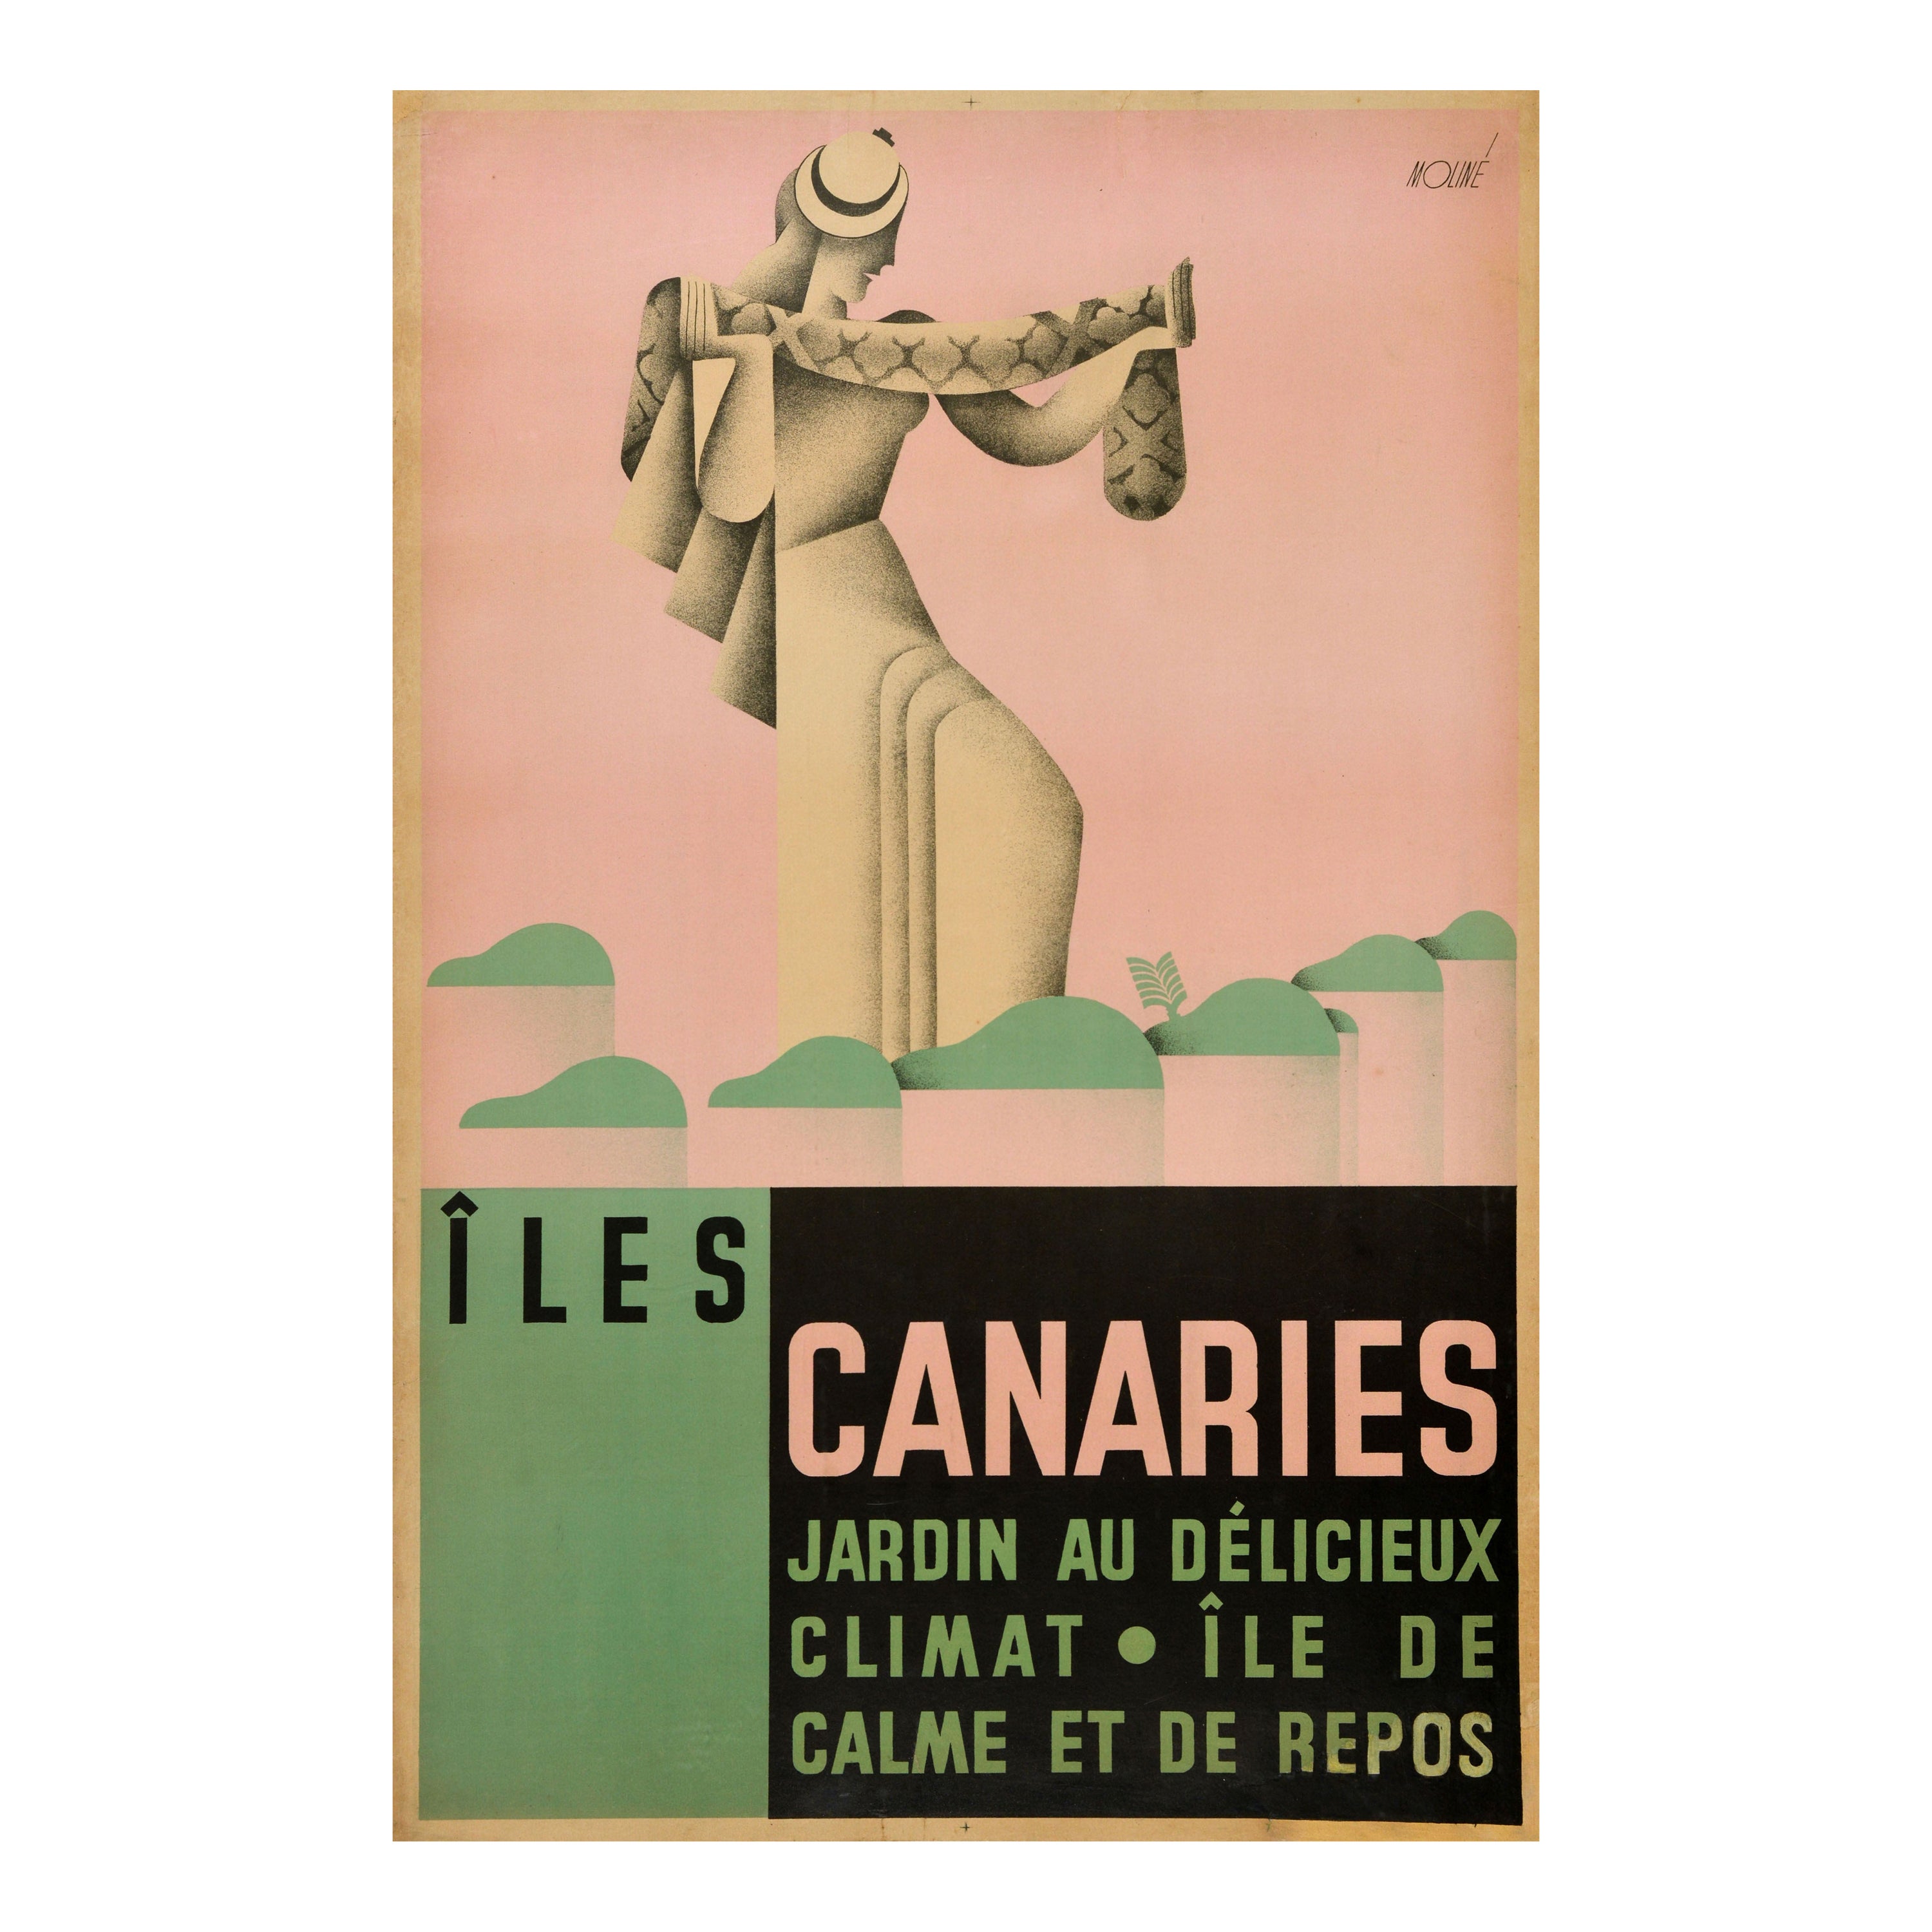 Original Vintage Travel Poster Canary Islands Iles Canaries Canarias Spain Art For Sale